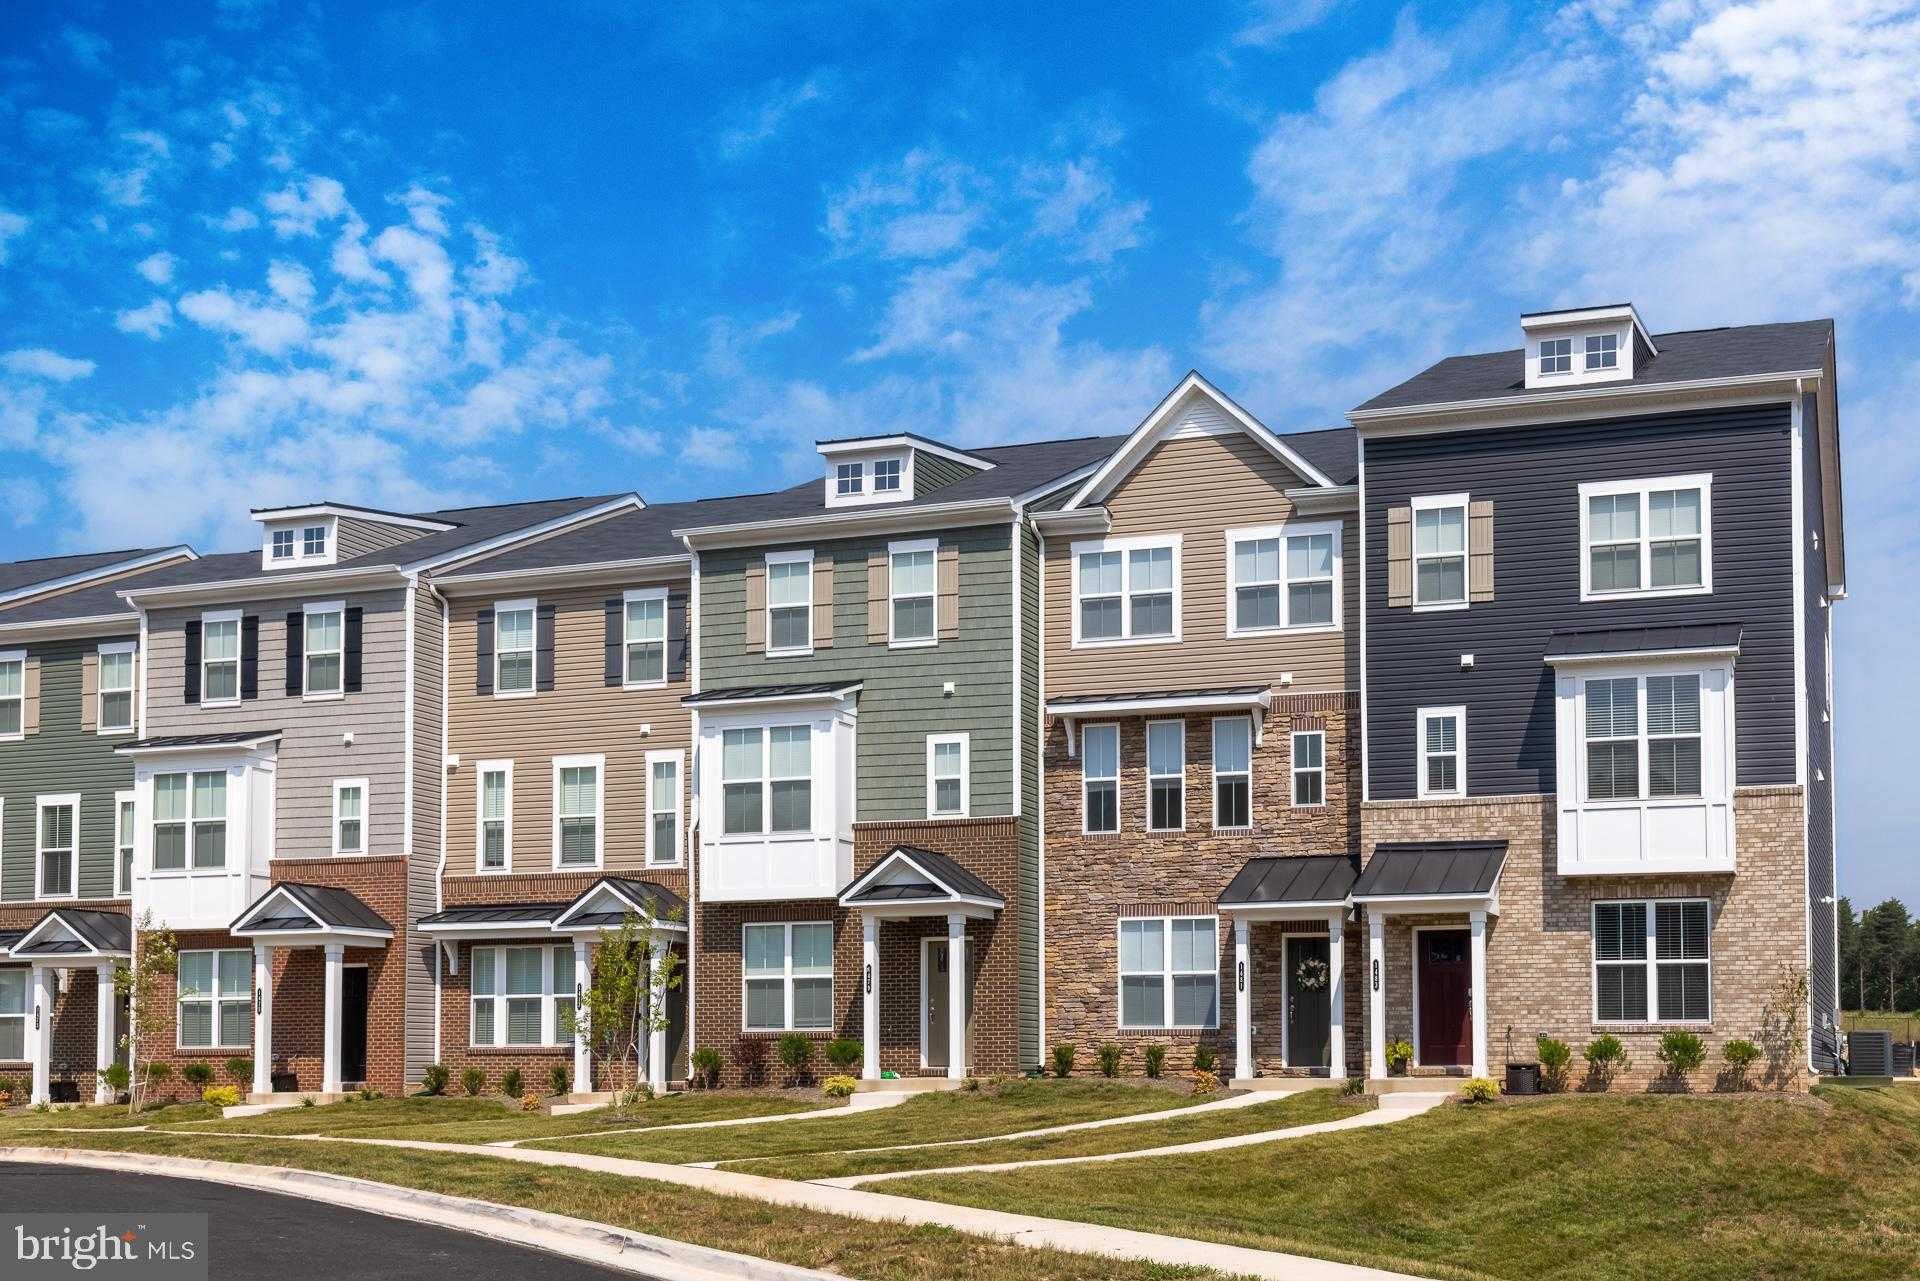 View HANOVER, MD 21076 townhome